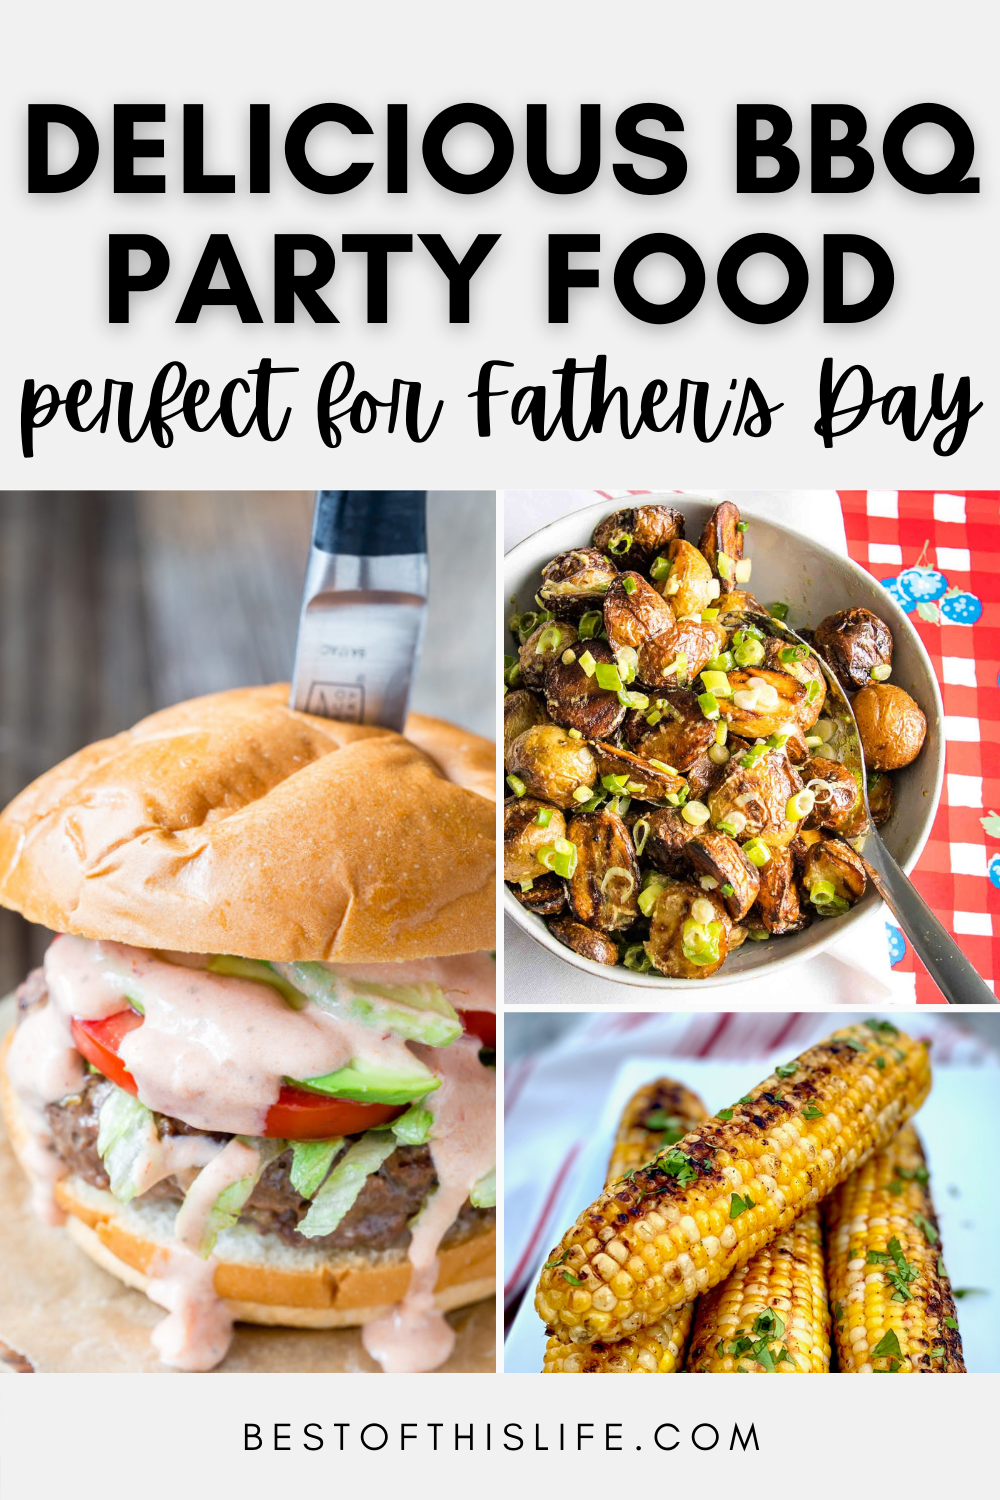 BBQ Party Food That’s Perfect For Father’s Day